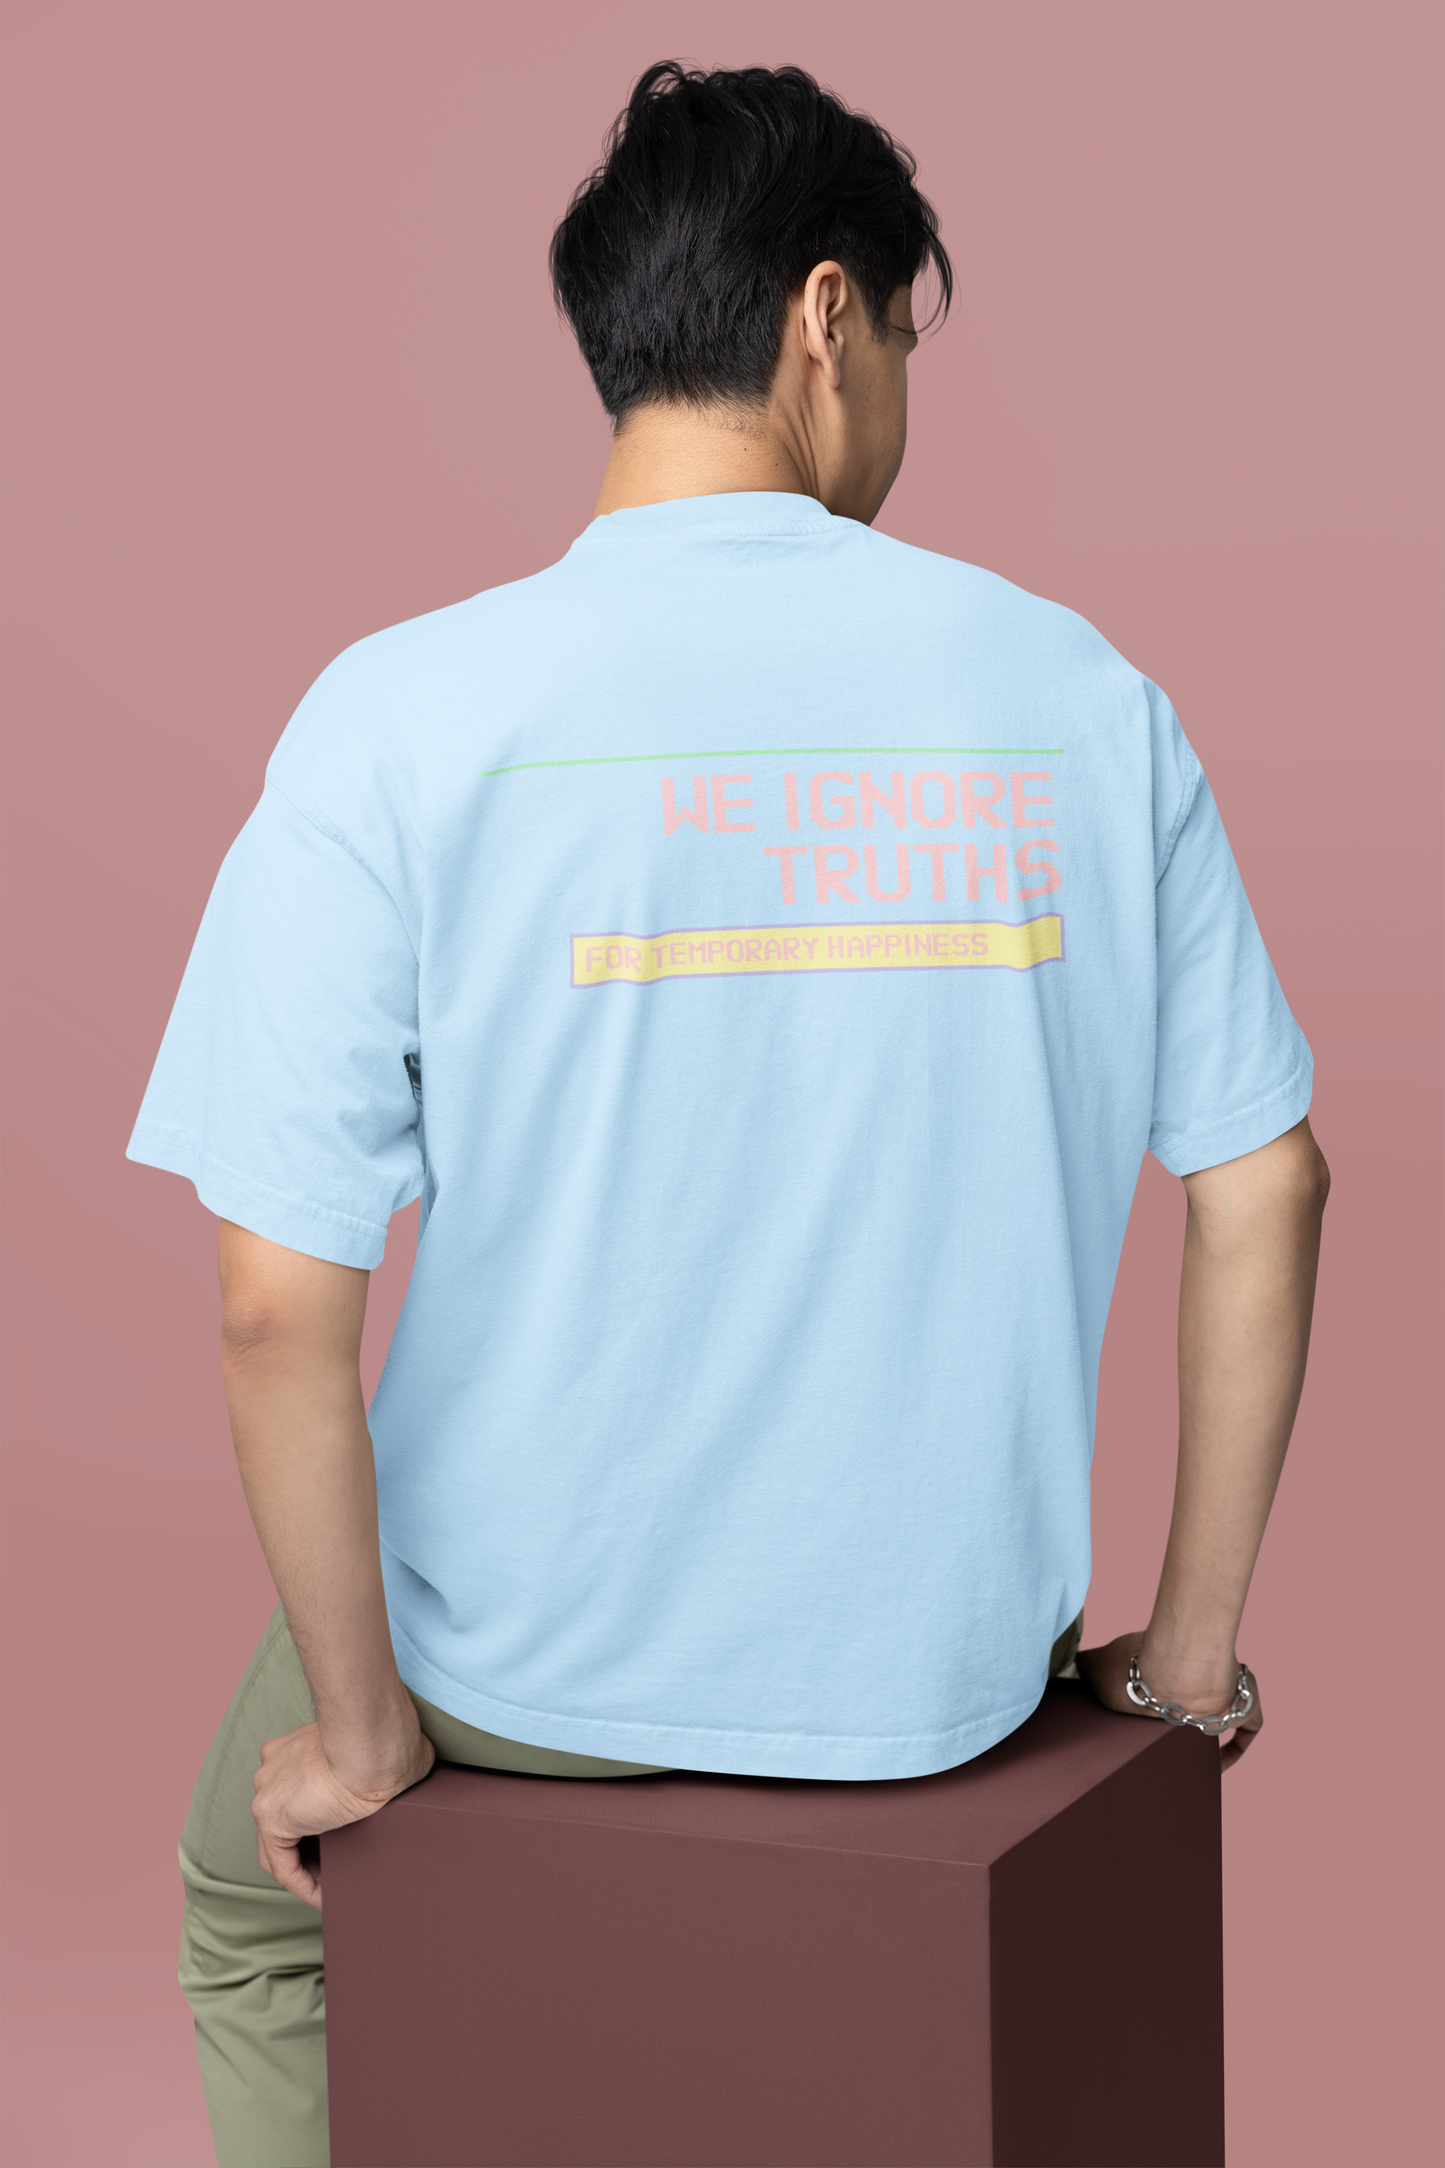 We Ignore Truths For Temporary Happiness Oversized Baby Blue Front and Back Printed T-shirt Unisex